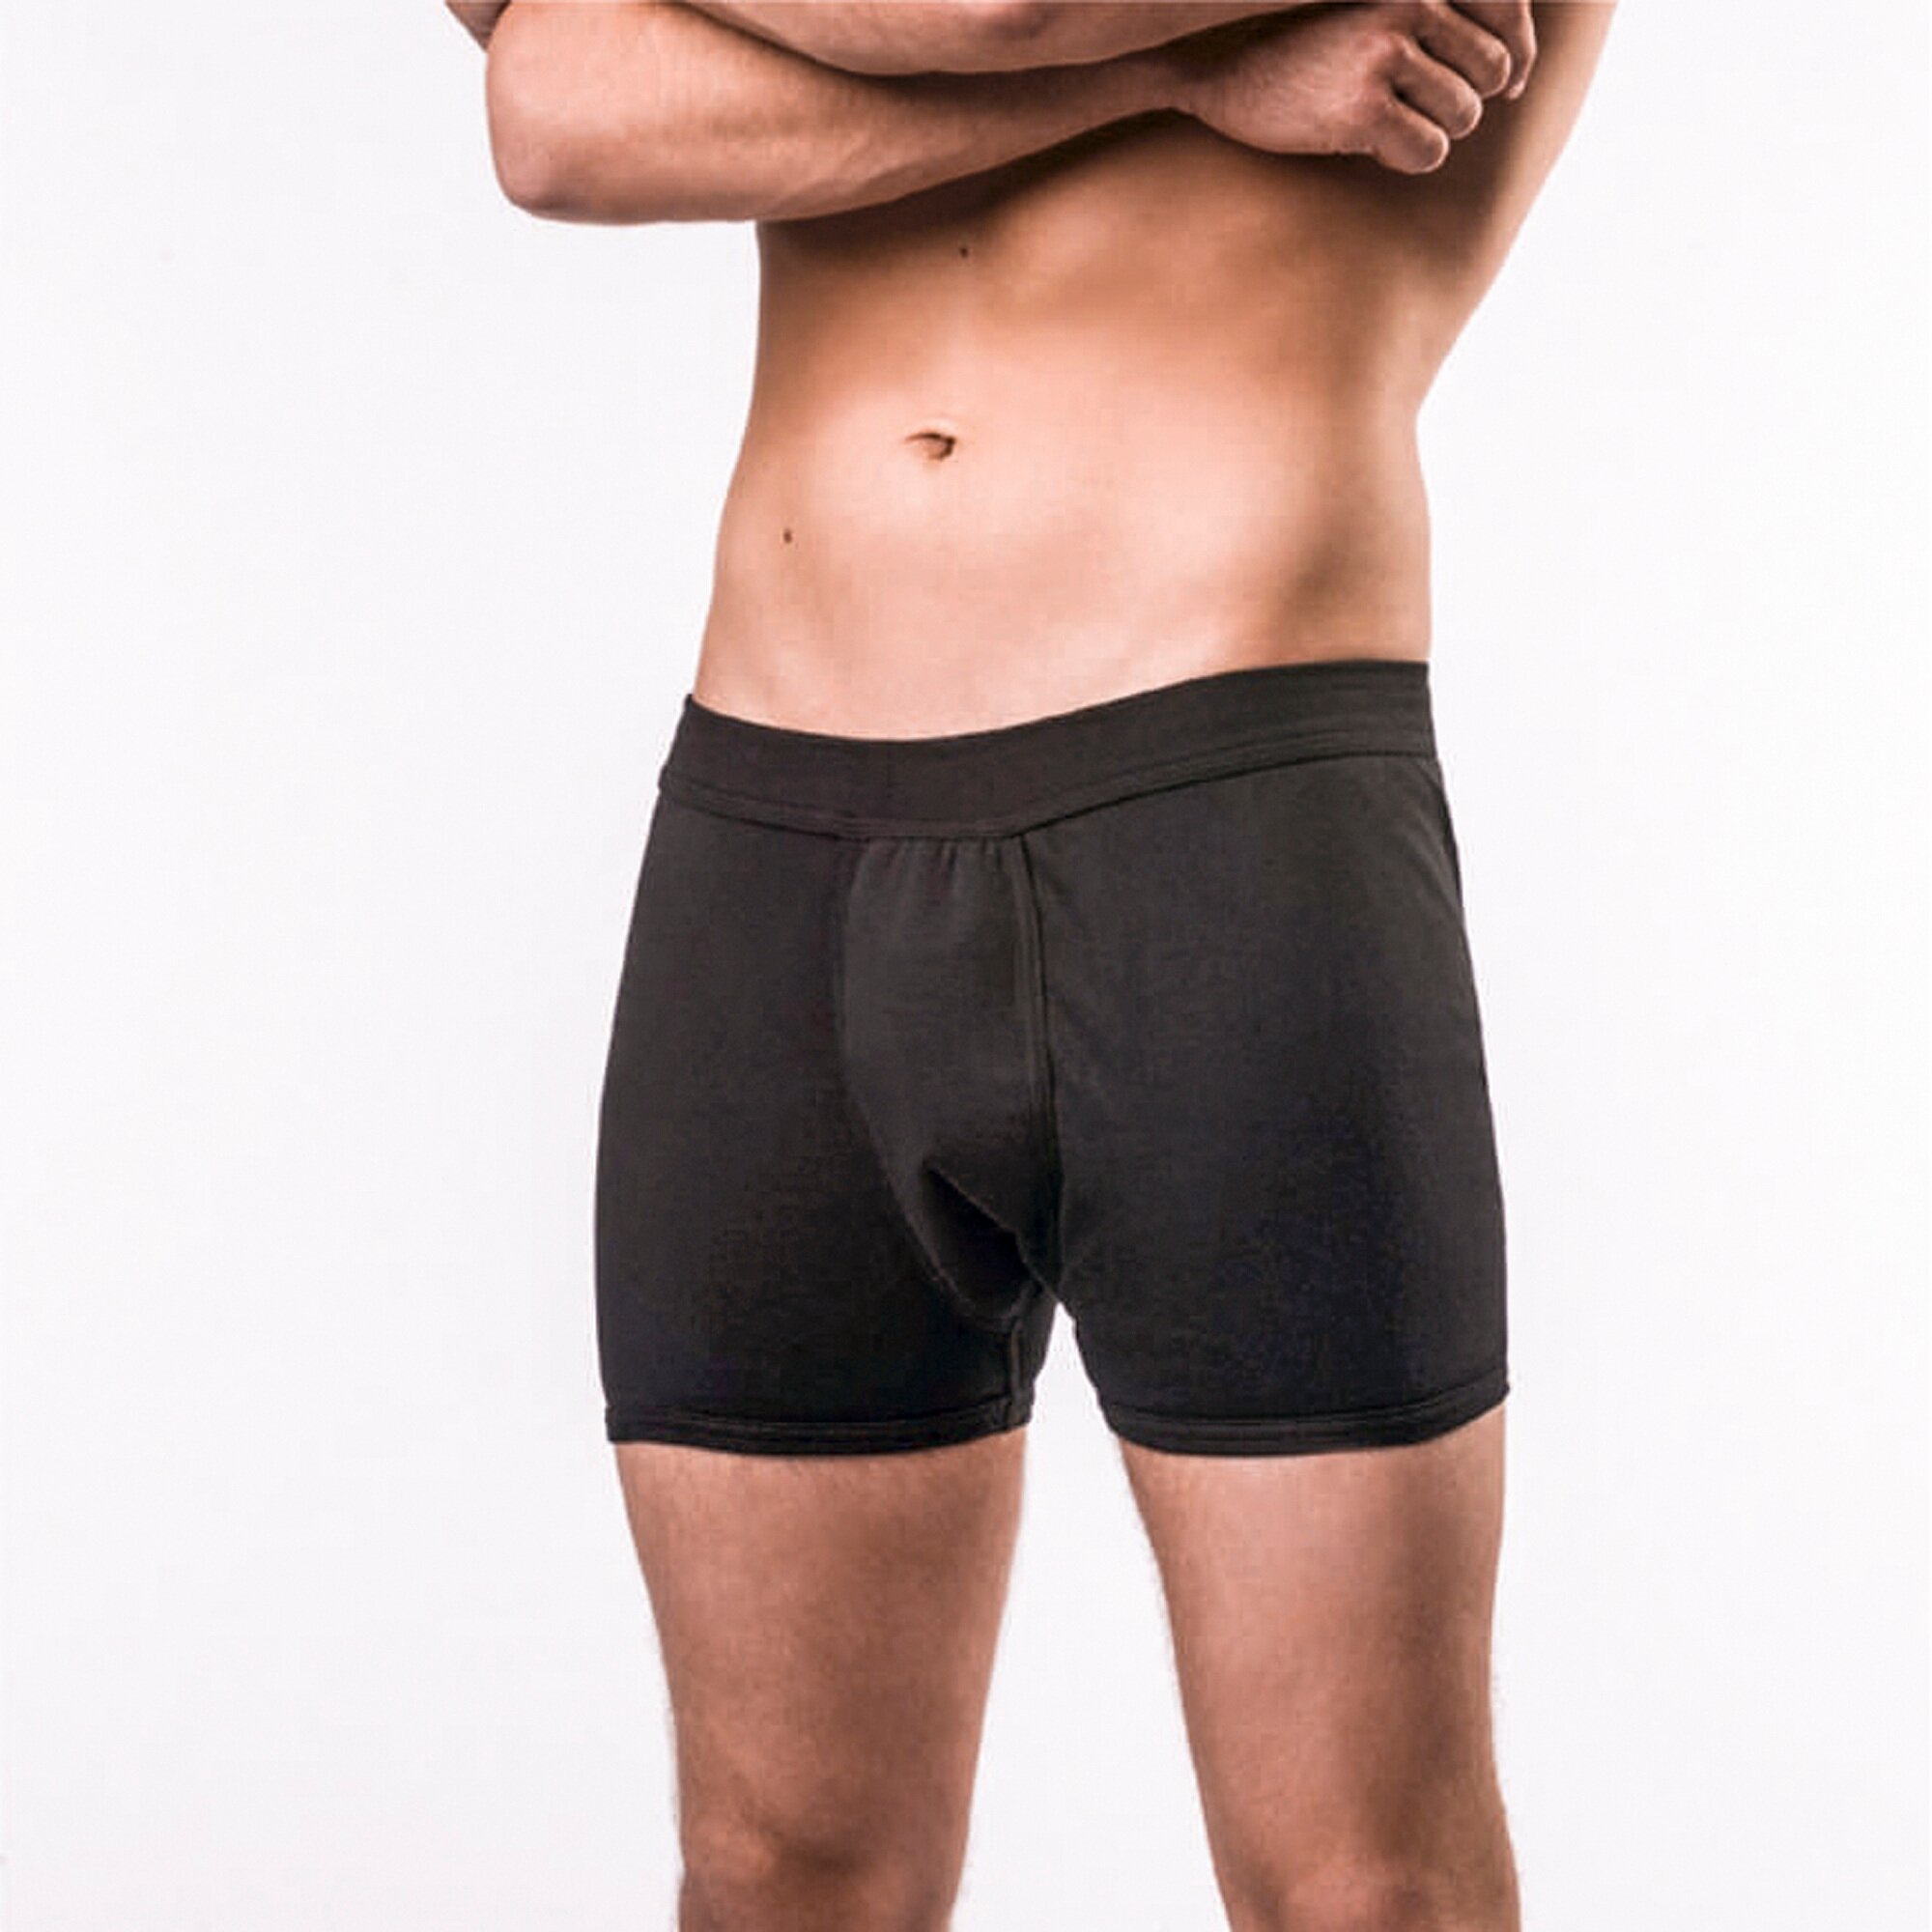 Shorts incontinence homme